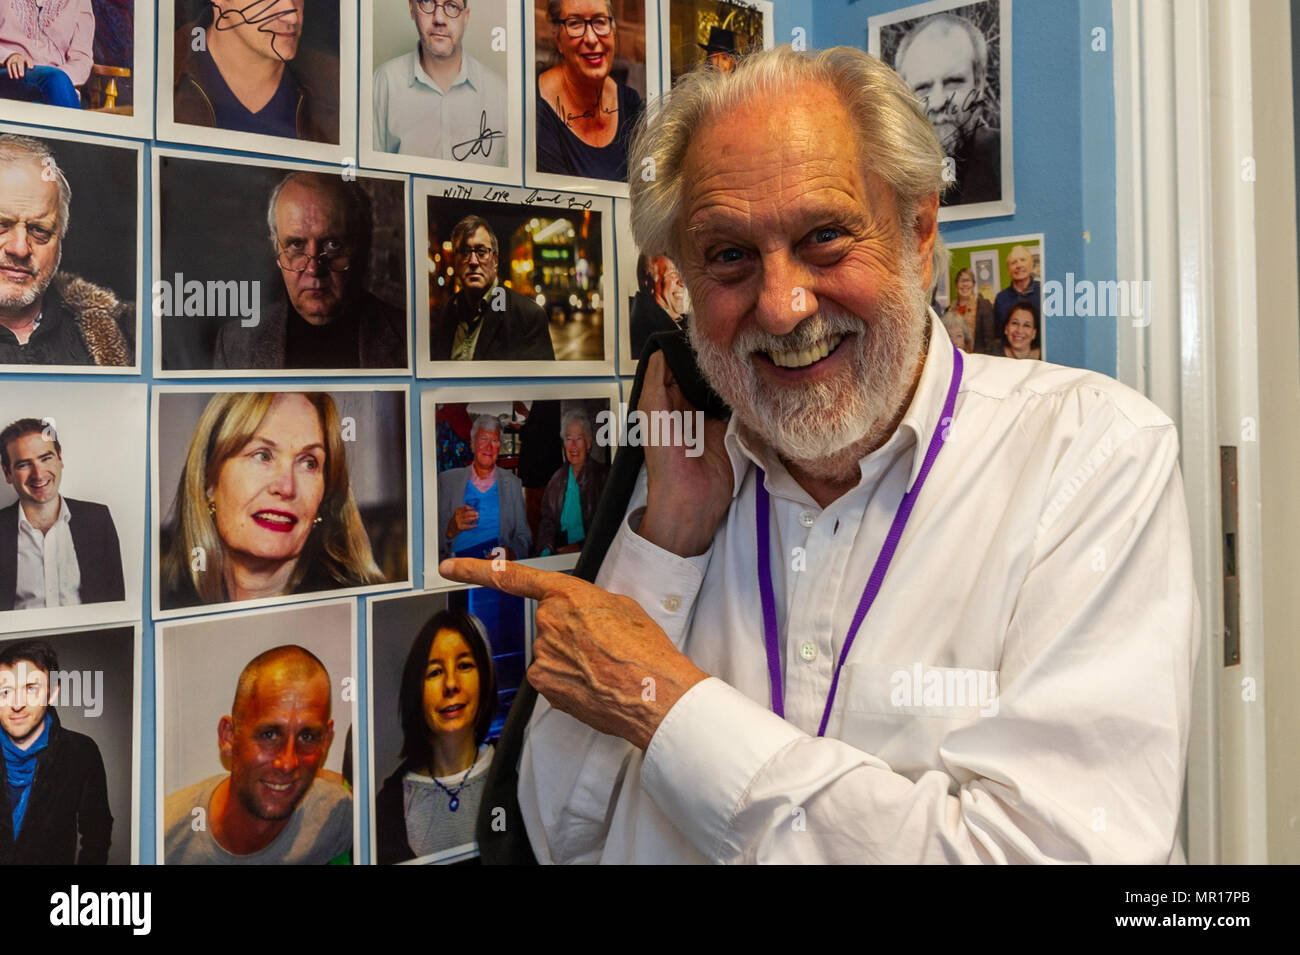 Schull, Ireland. 25th May 2018. Pictured at the Fastnet Film Festival Guests Party held on Friday night in Schull is Lord David Puttnam. David has produced films such as Chariots of Fire, Bugsy Malone and Local Hero, to name but a few. The festival runs until Sunday. Credit: Andy Gibson/Alamy Live News. Stock Photo